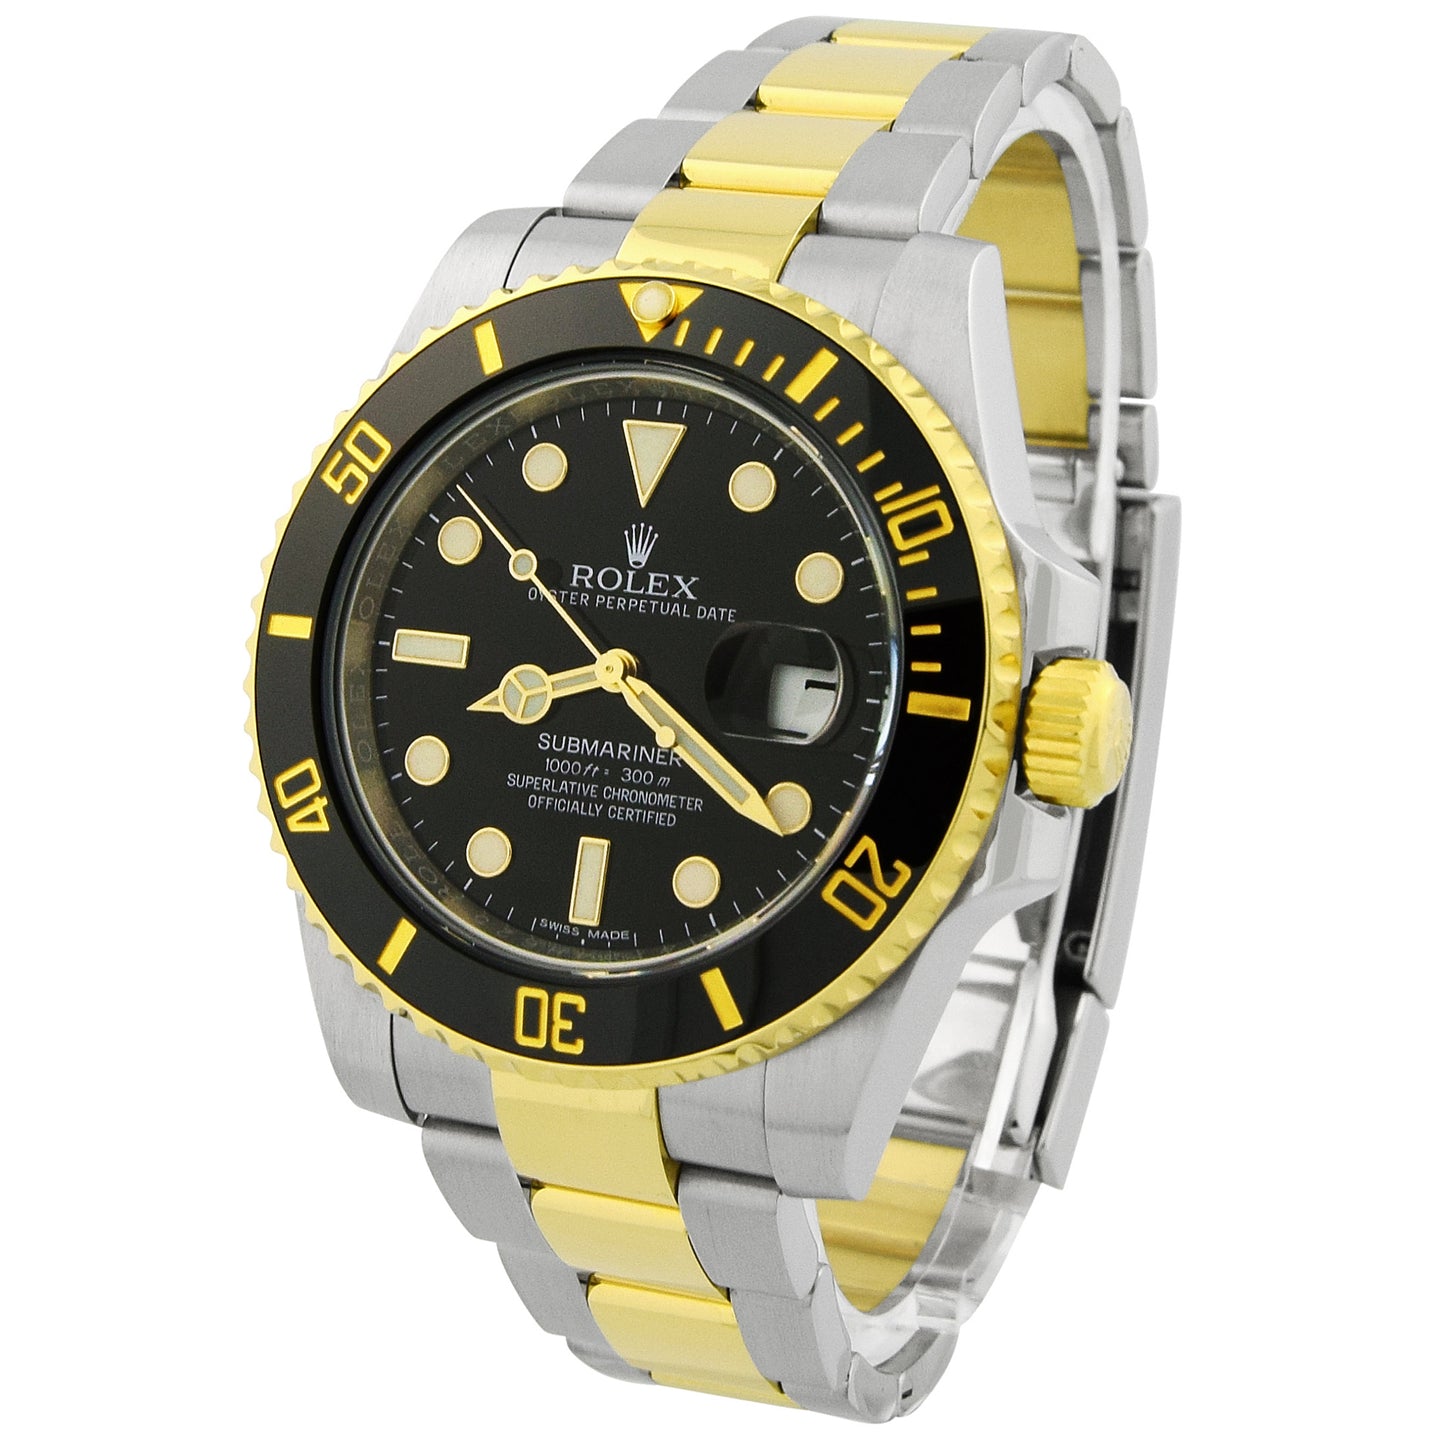 Rolex Submariner Two Tone Stainless Steel & Yellow Gold 40mm Black Dot Dial Watch Reference #: 116613LN - Happy Jewelers Fine Jewelry Lifetime Warranty